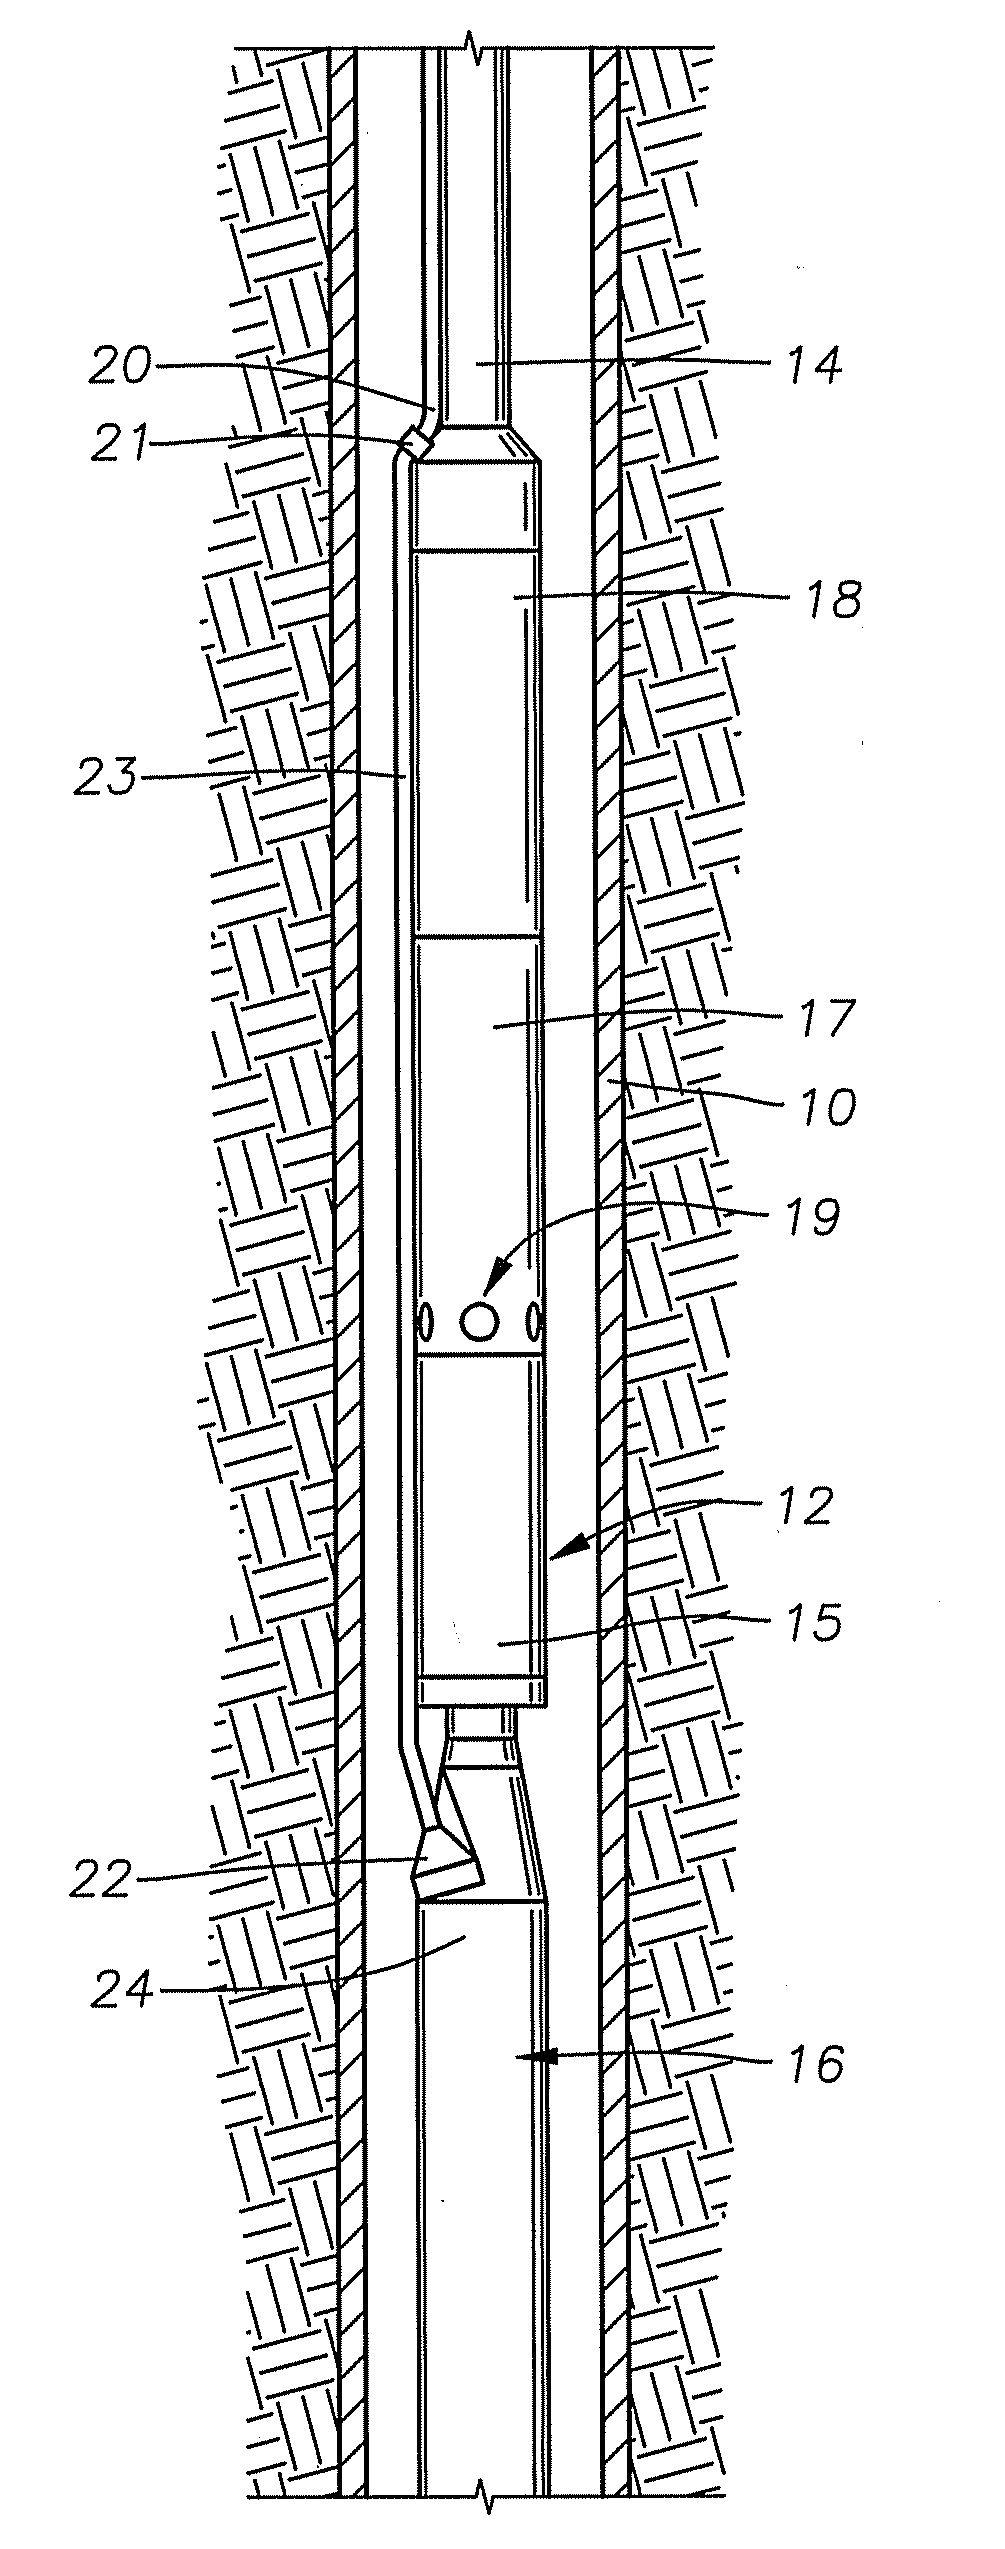 Electrical Submersible Pump System Having High Temperature Insulation Materials and Buffered Lubricant